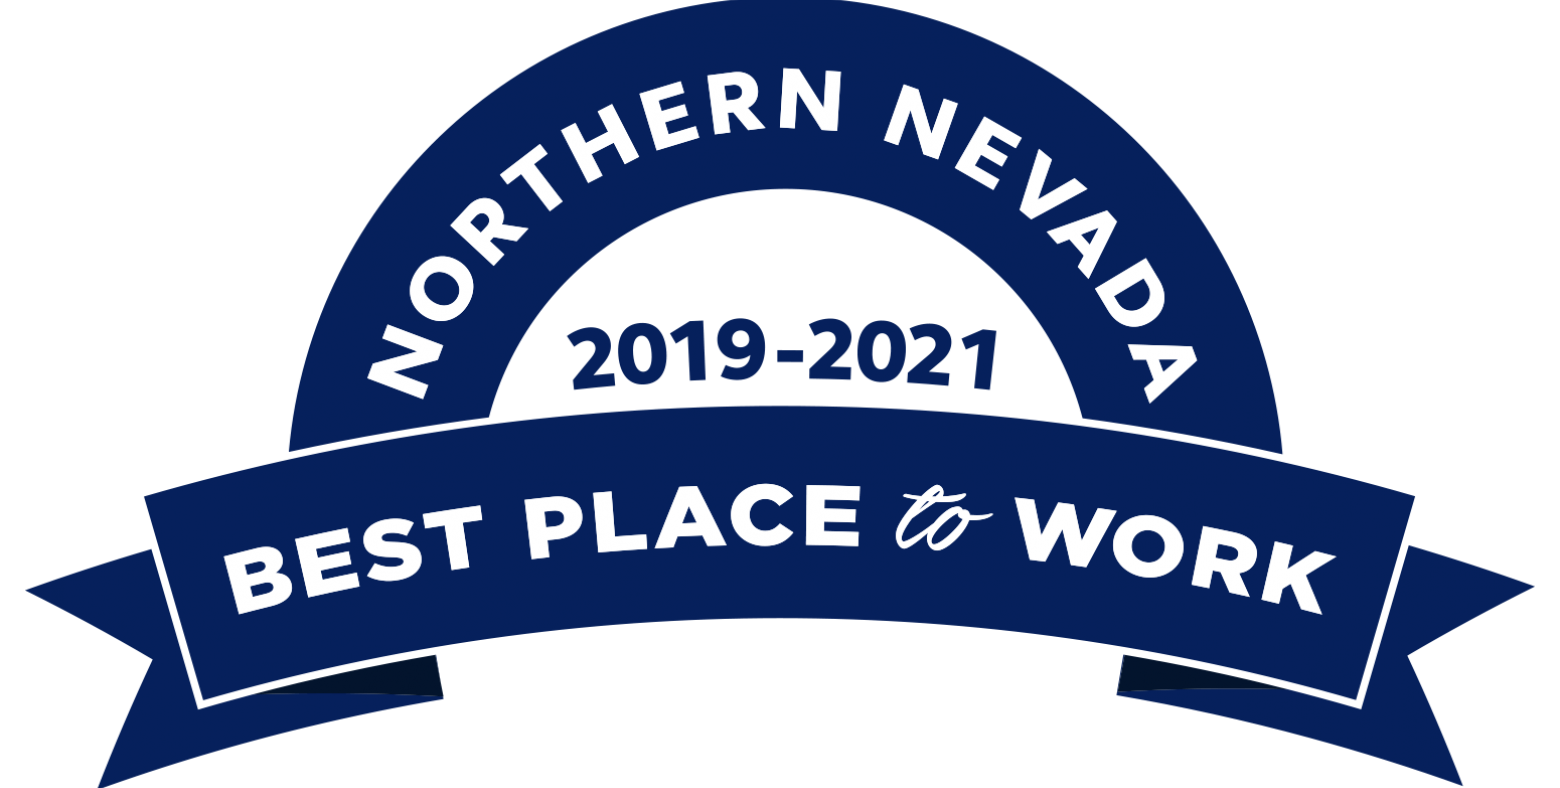 Best Places to Work 2019-2021 logo 